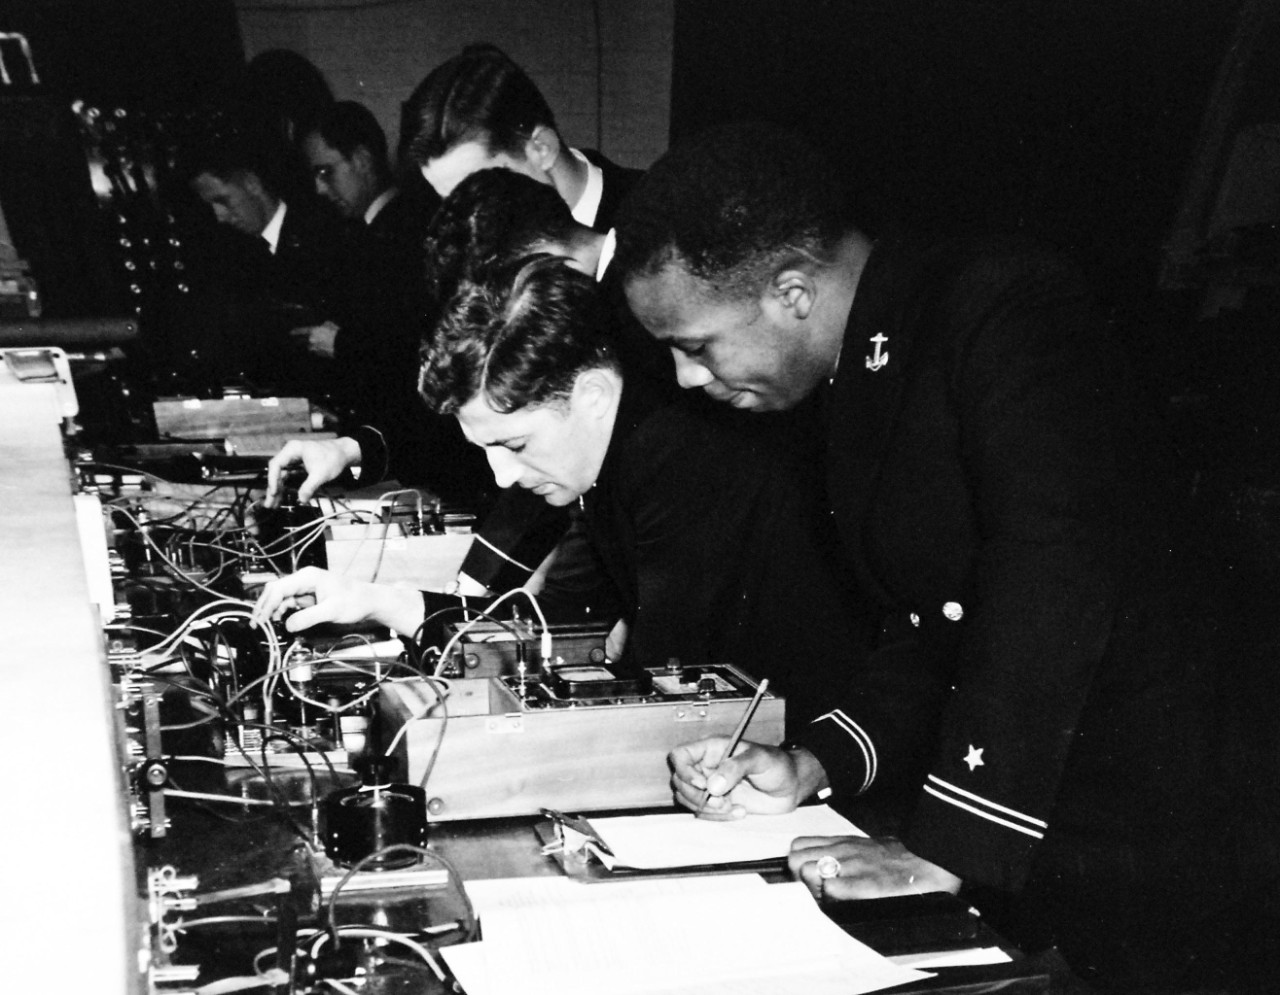 80-G-707015:   Midshipman Wesley Brown, June 1949.   U.S. Naval Academy, Annapolis, Maryland.  Shown:  Laboratory exercise in Electrical Engineering, released June 3, 1949.  In this group is Midshipman Wesley Brown.   Note, Brown was the first African-American to graduate from the U.S. Naval Academy and served as a Civil Engineer, retiring in June 1969 with the rank of Lieutenant Commander.   Brown died on May 12, 2012.   U.S. Navy Photograph, now in the collections of the National Archives.  Note, the image is curved.  